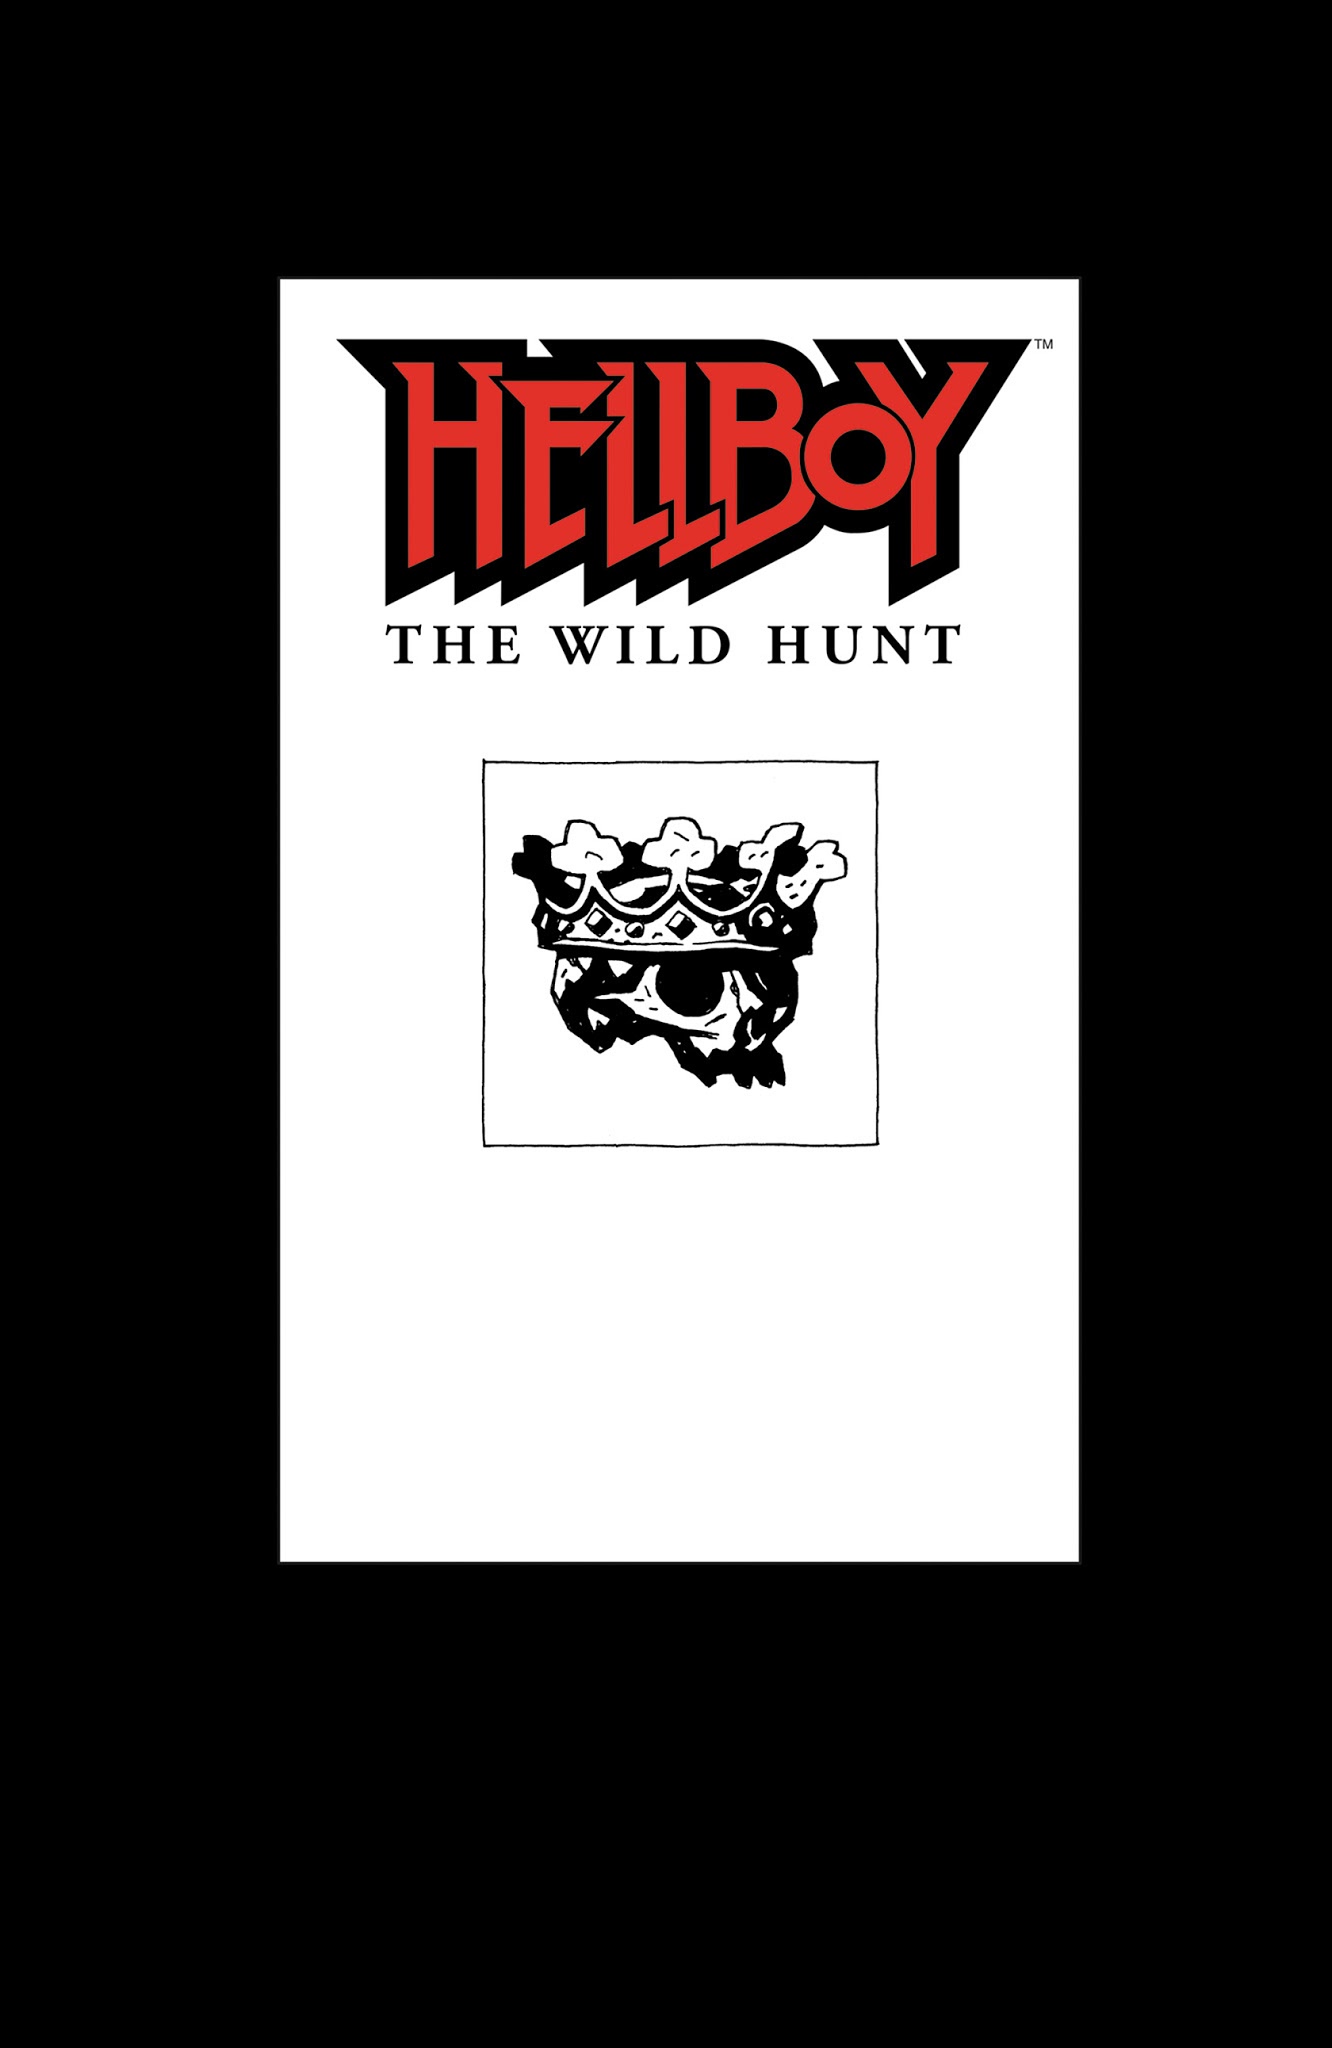 Read online Hellboy: The Wild Hunt comic -  Issue # TPB - 2